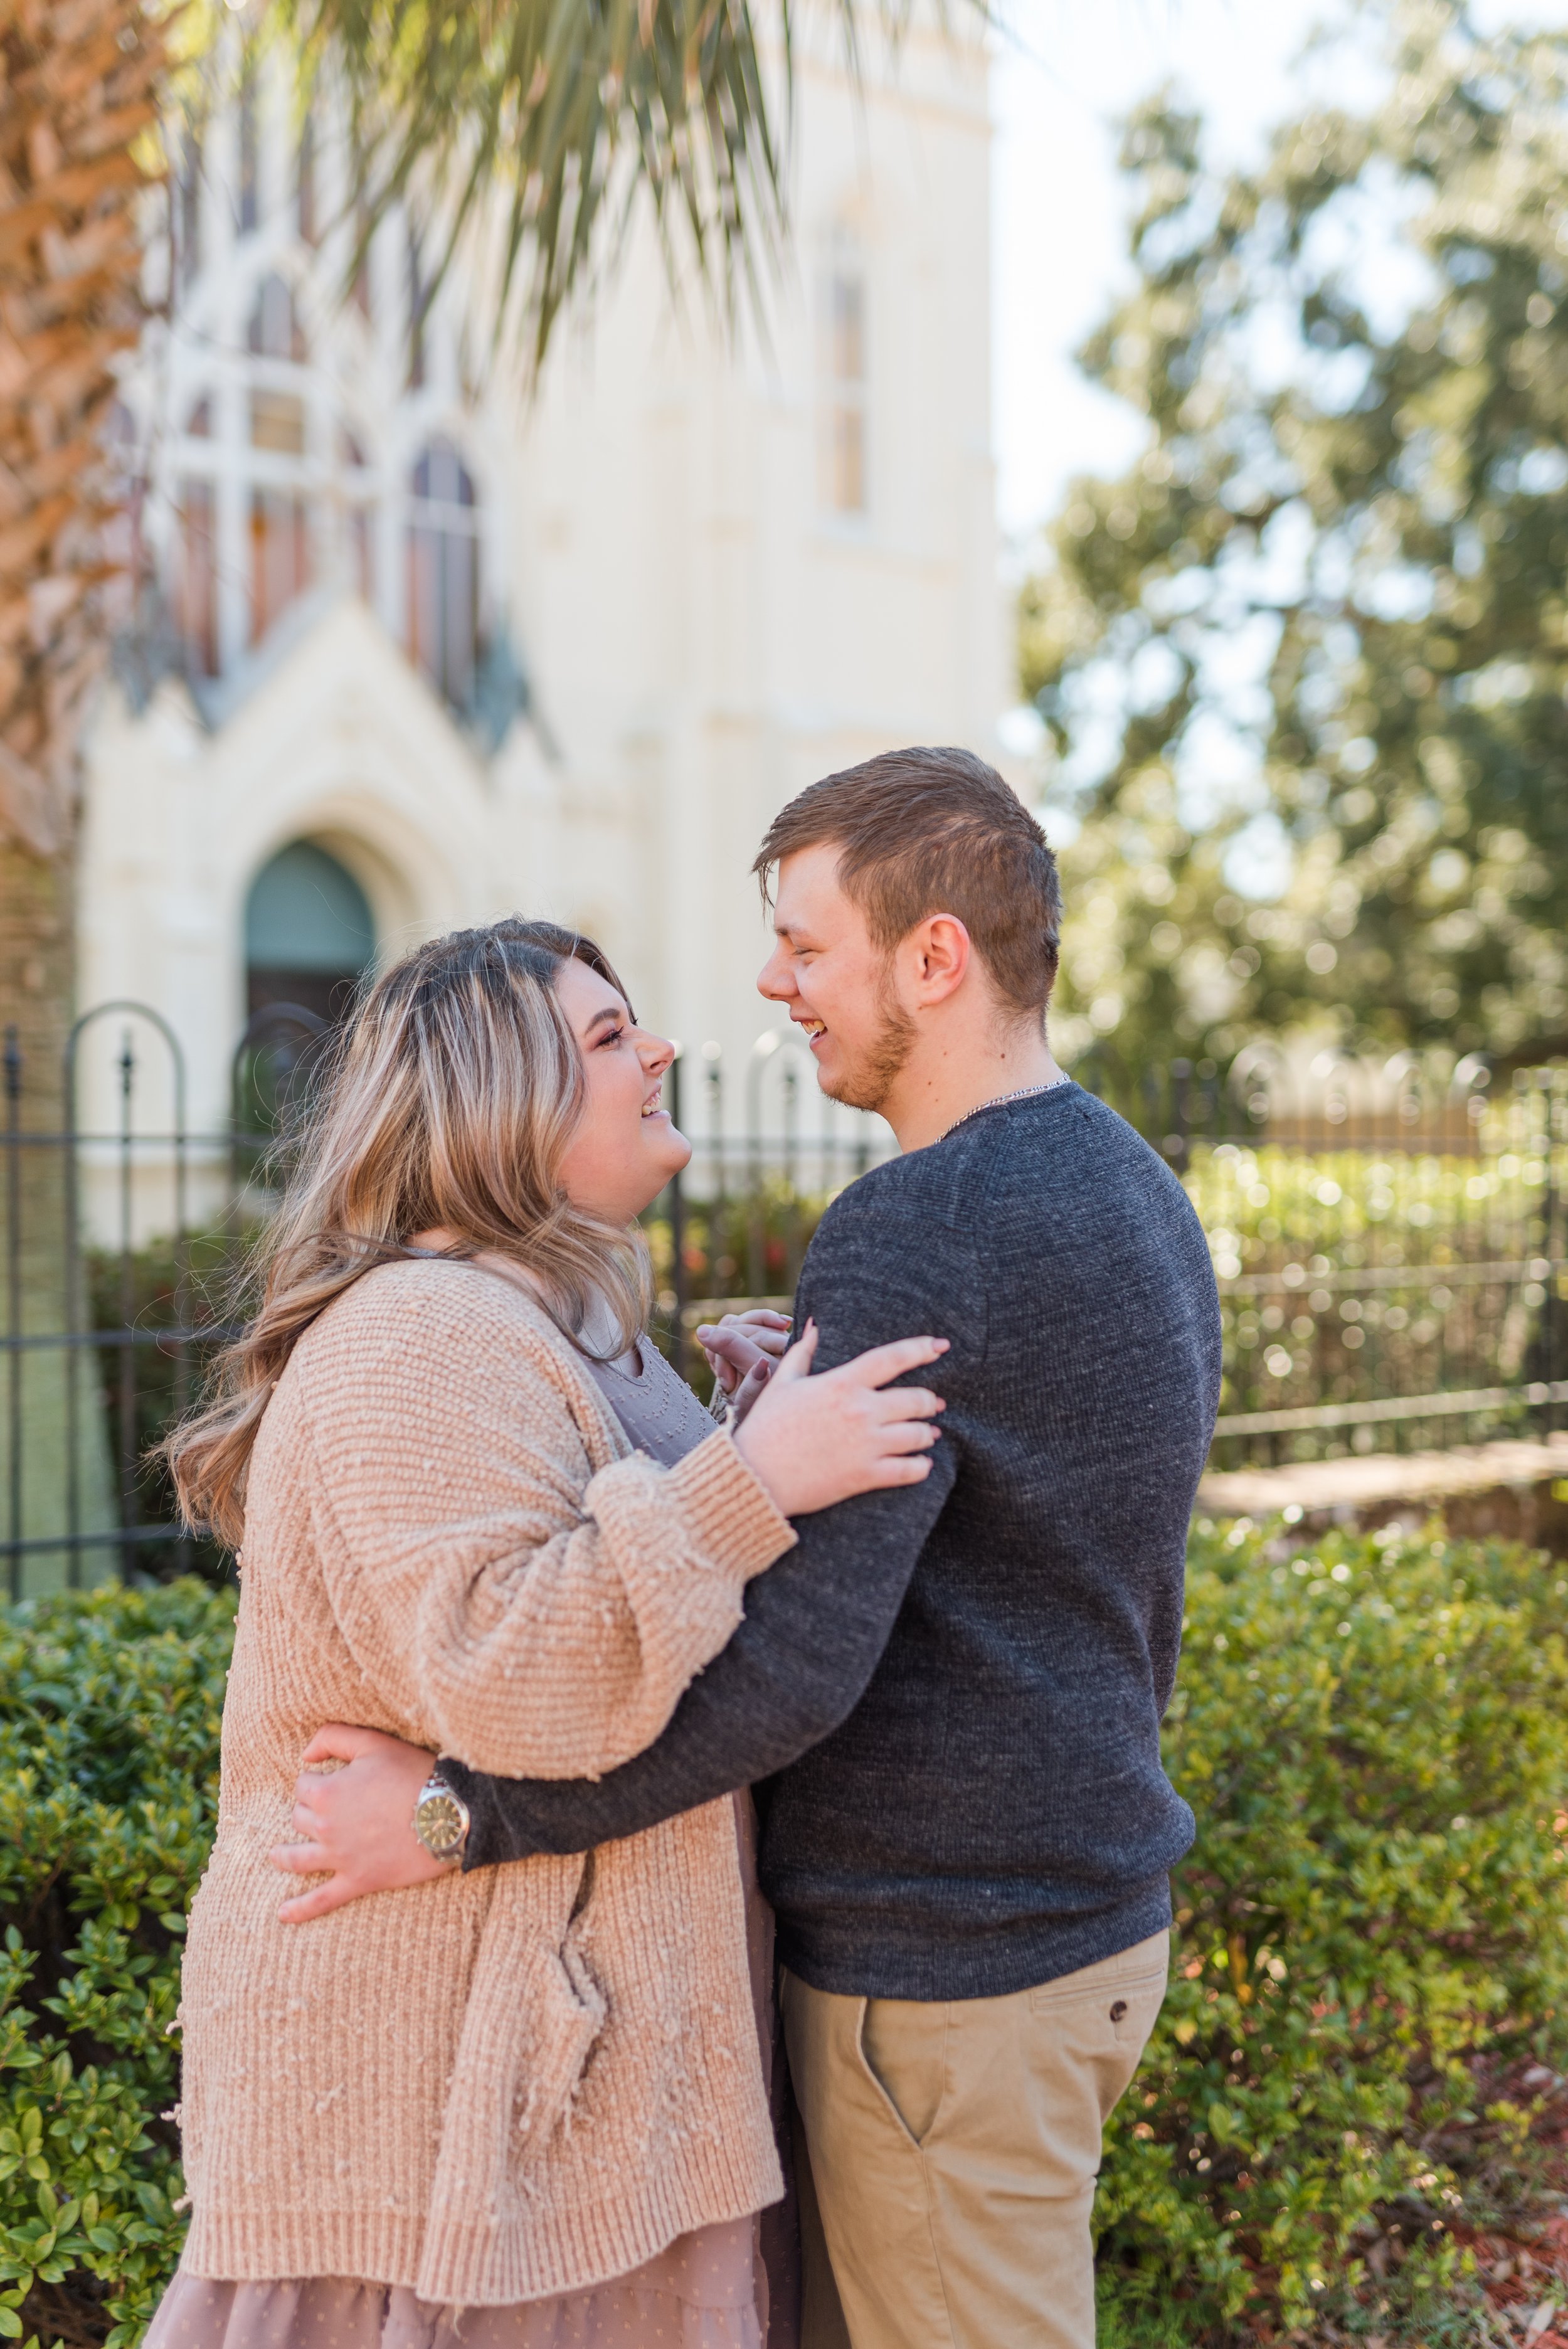 Spring Hill College Engagement Session in Mobile, AL Photographed by Kristen Marcus Photography